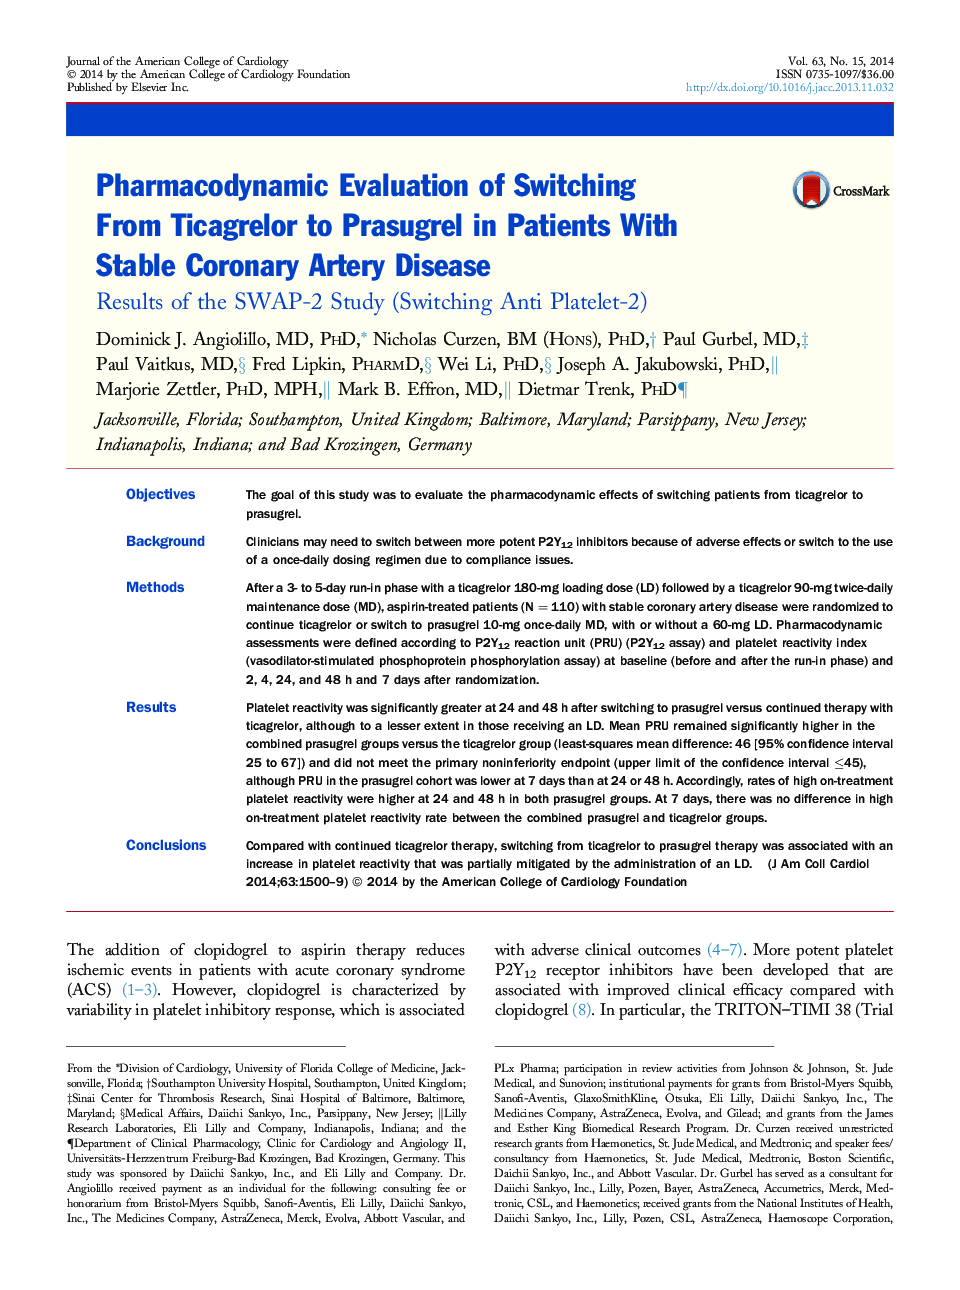 Pharmacodynamic Evaluation of Switching From Ticagrelor to Prasugrel in Patients With Stable Coronary Artery Disease : Results of the SWAP-2 Study (Switching Anti Platelet-2)